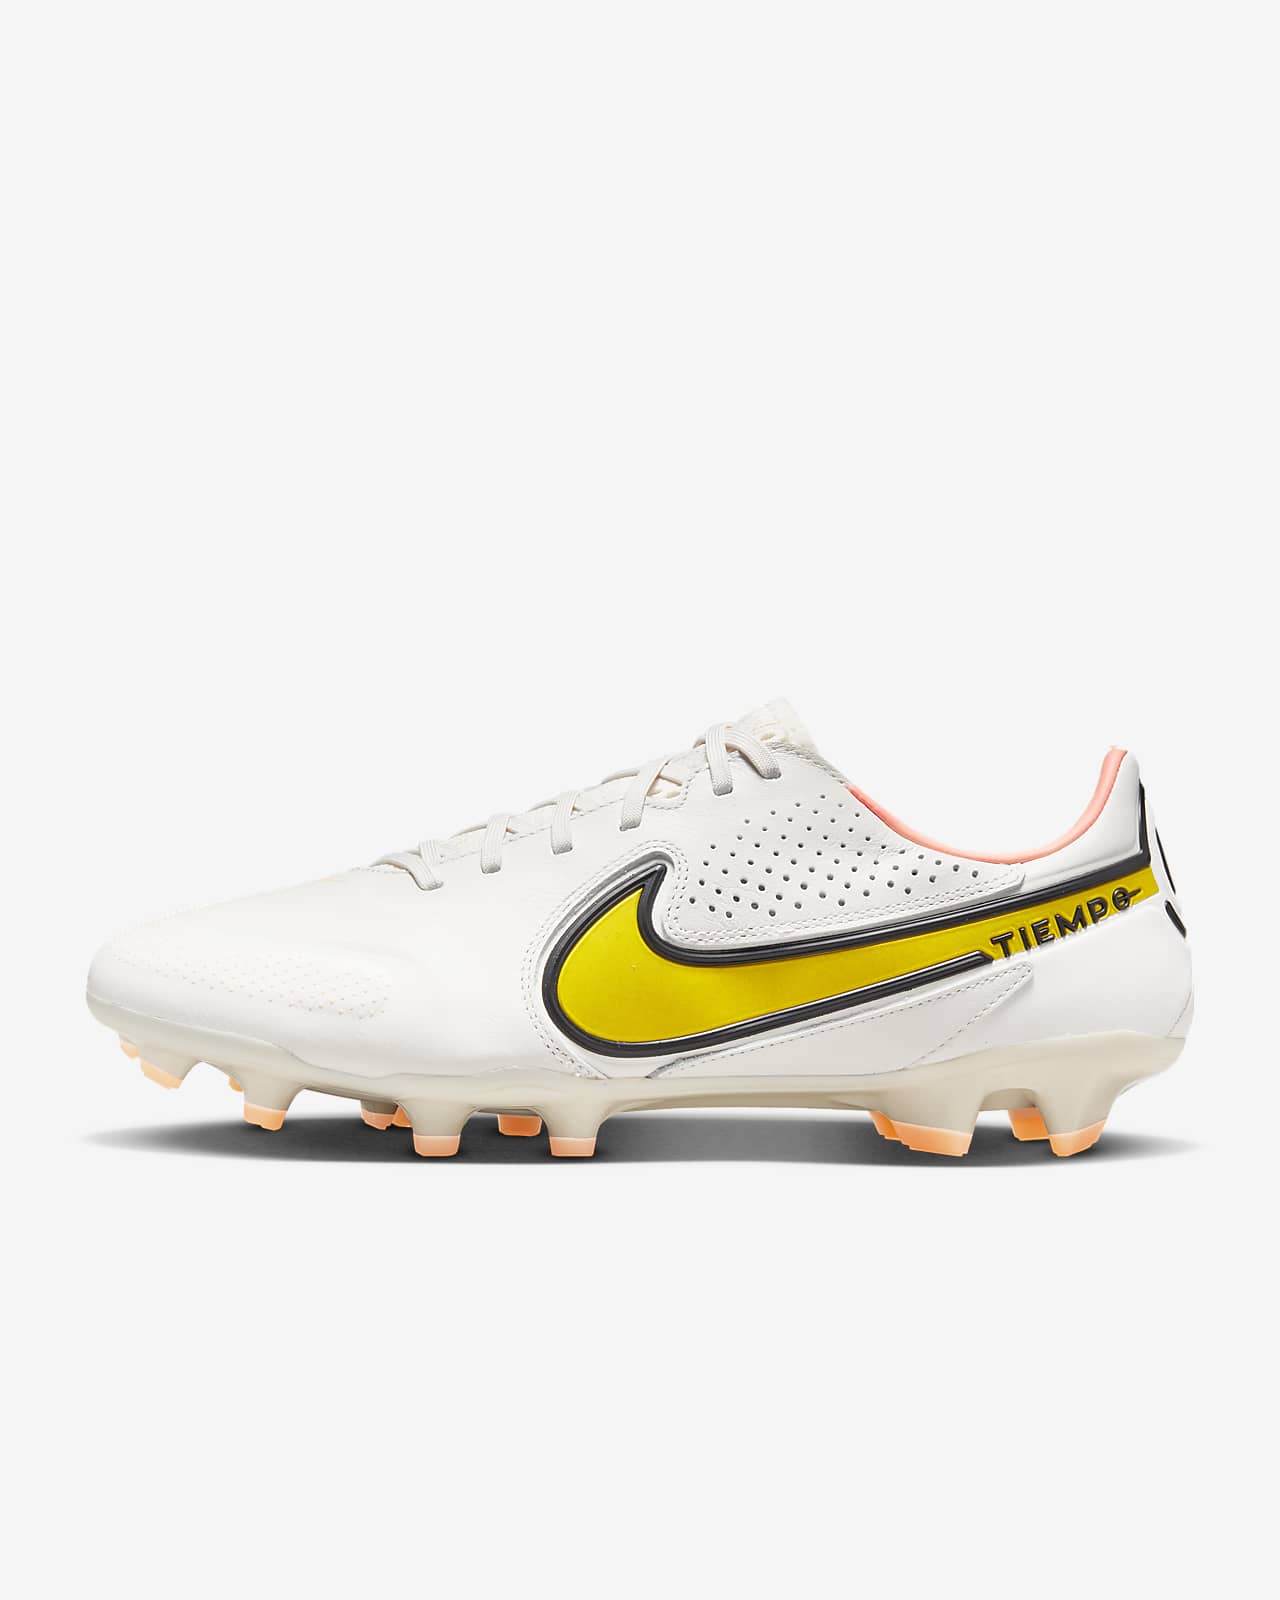 Nike Tiempo 9 Pro FG Firm-Ground Soccer Cleat. Nike.com